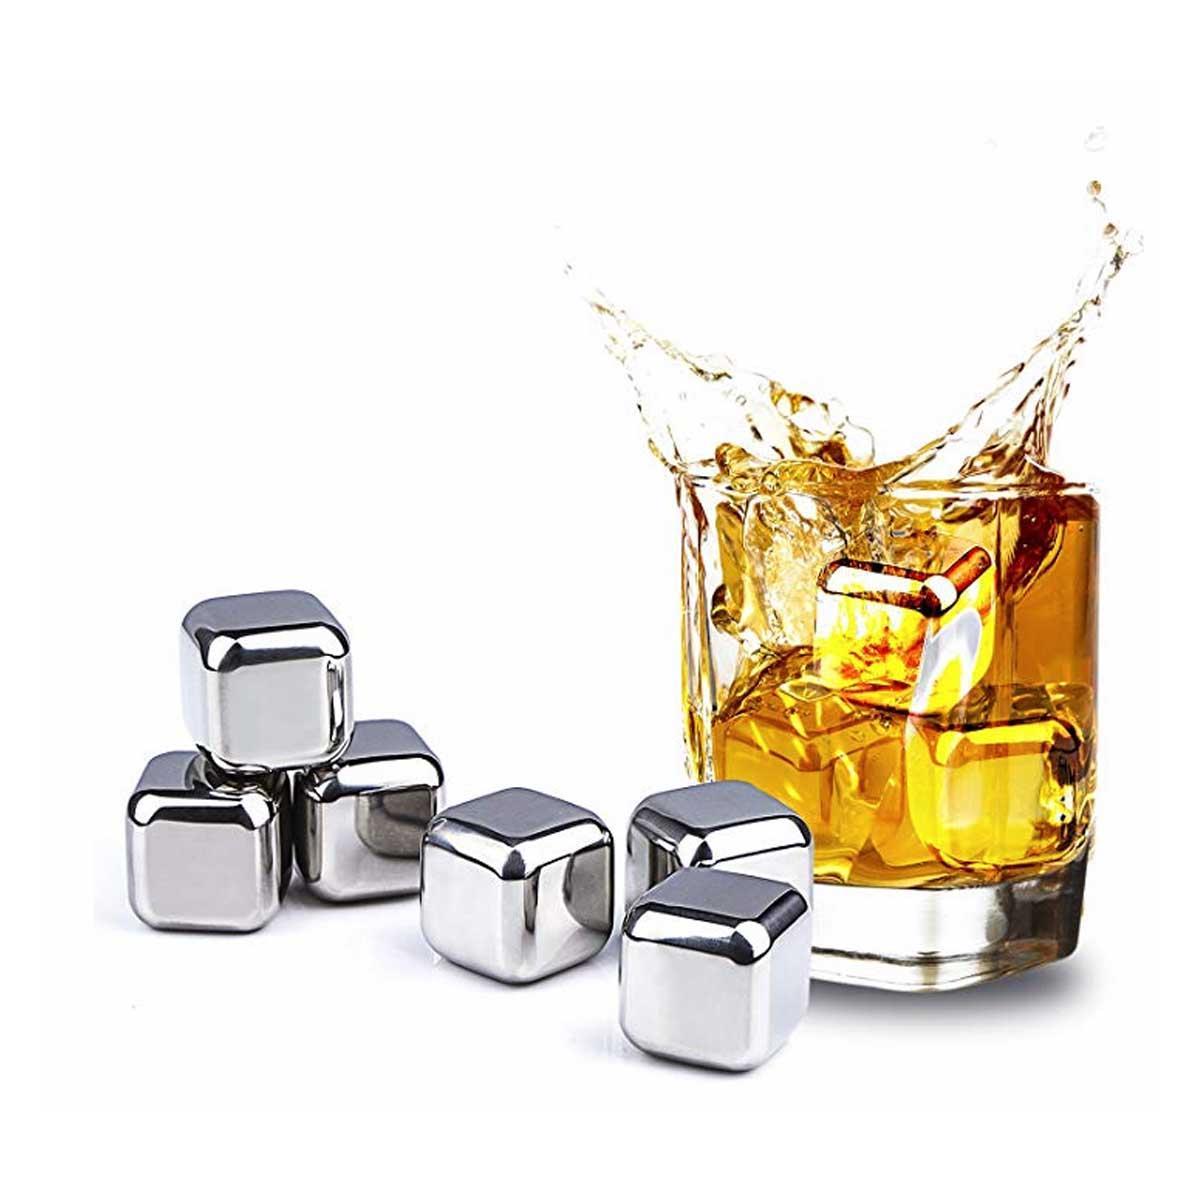 Stainless Steel Ice Cube/ Whisky Stone made stainless steel investment casting